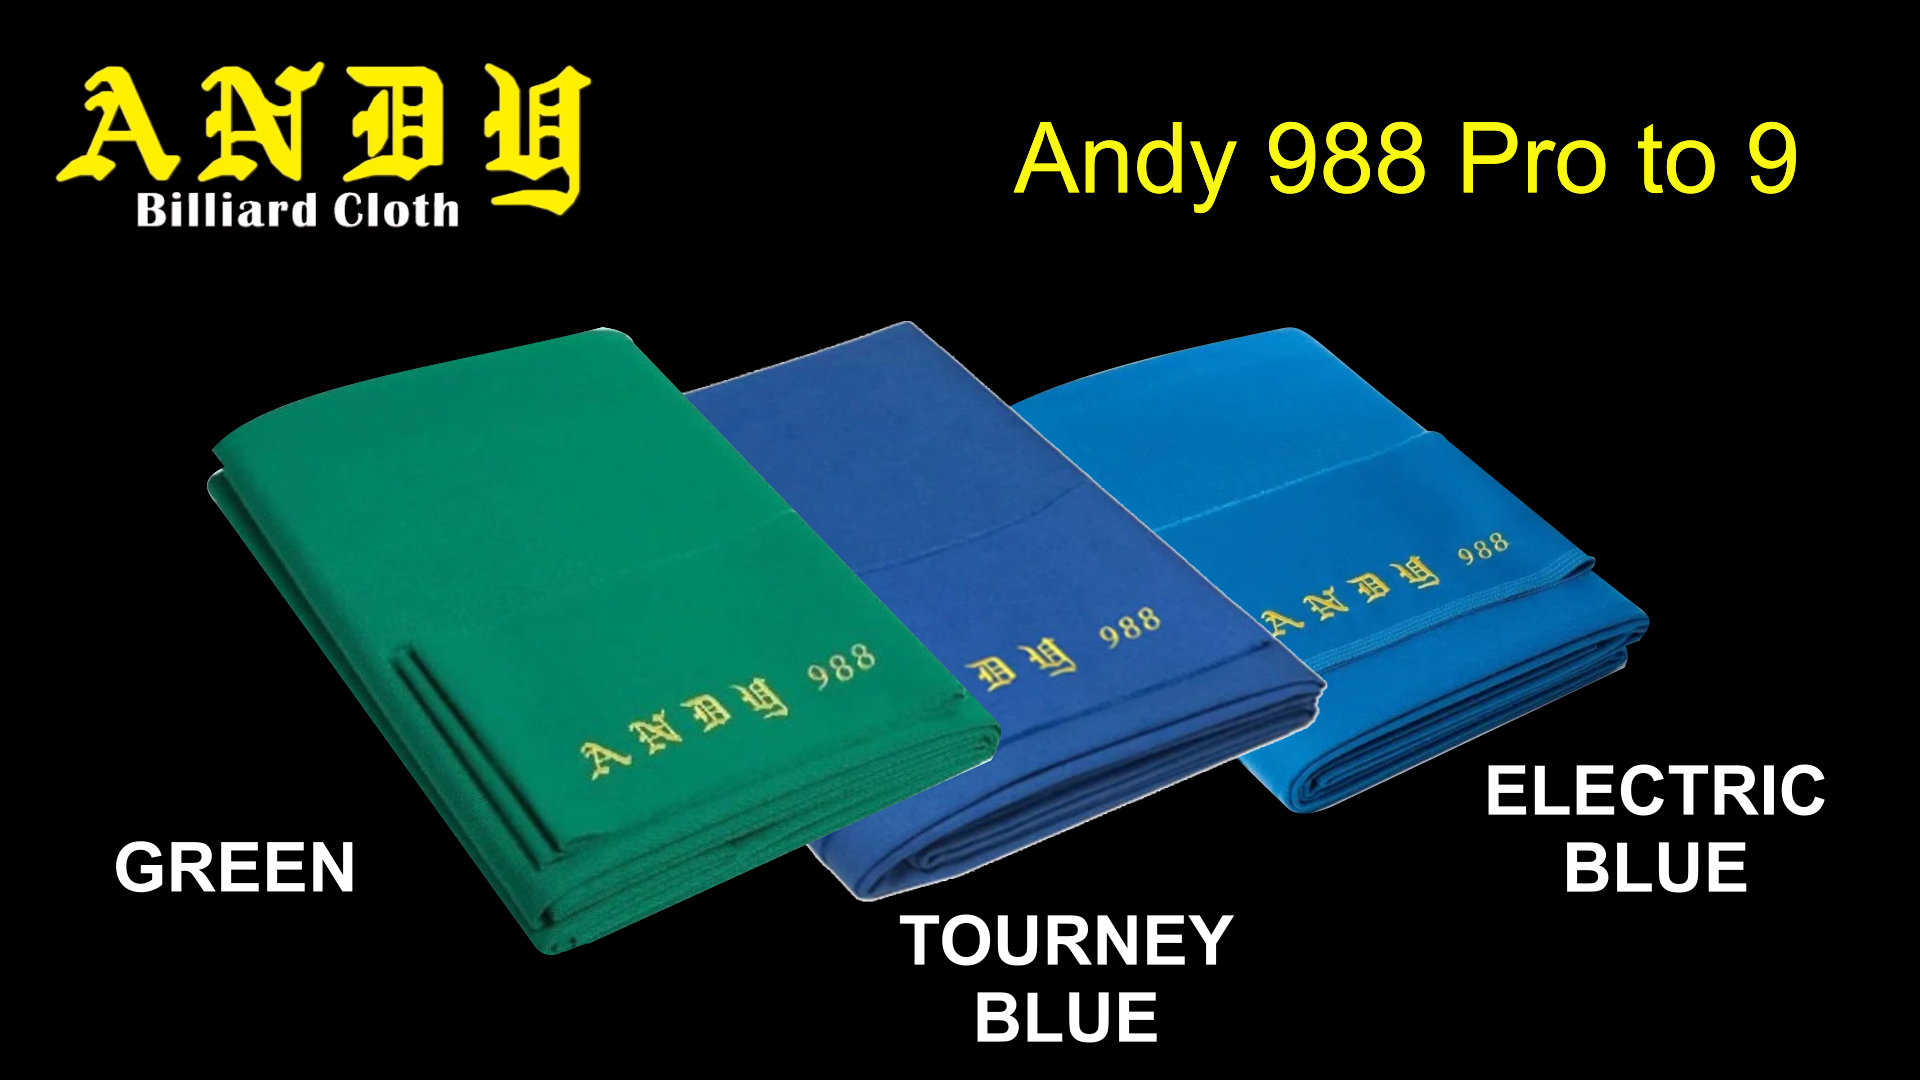 andy 988 pro to 9